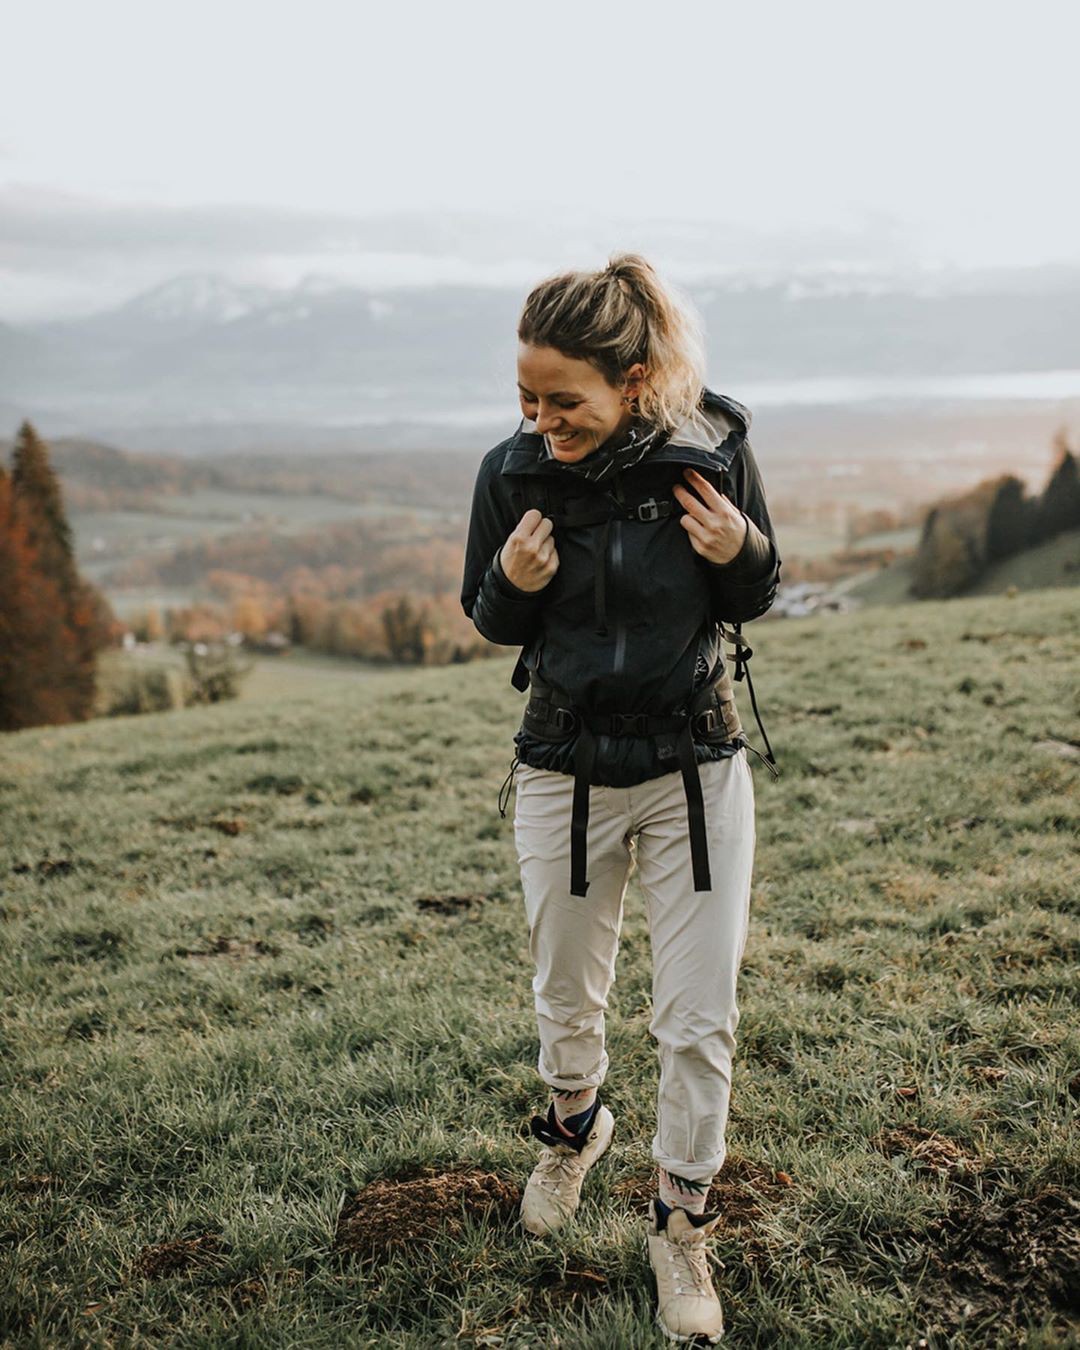 Outfit ideas with jacket, jeans: Hiking Outfits  